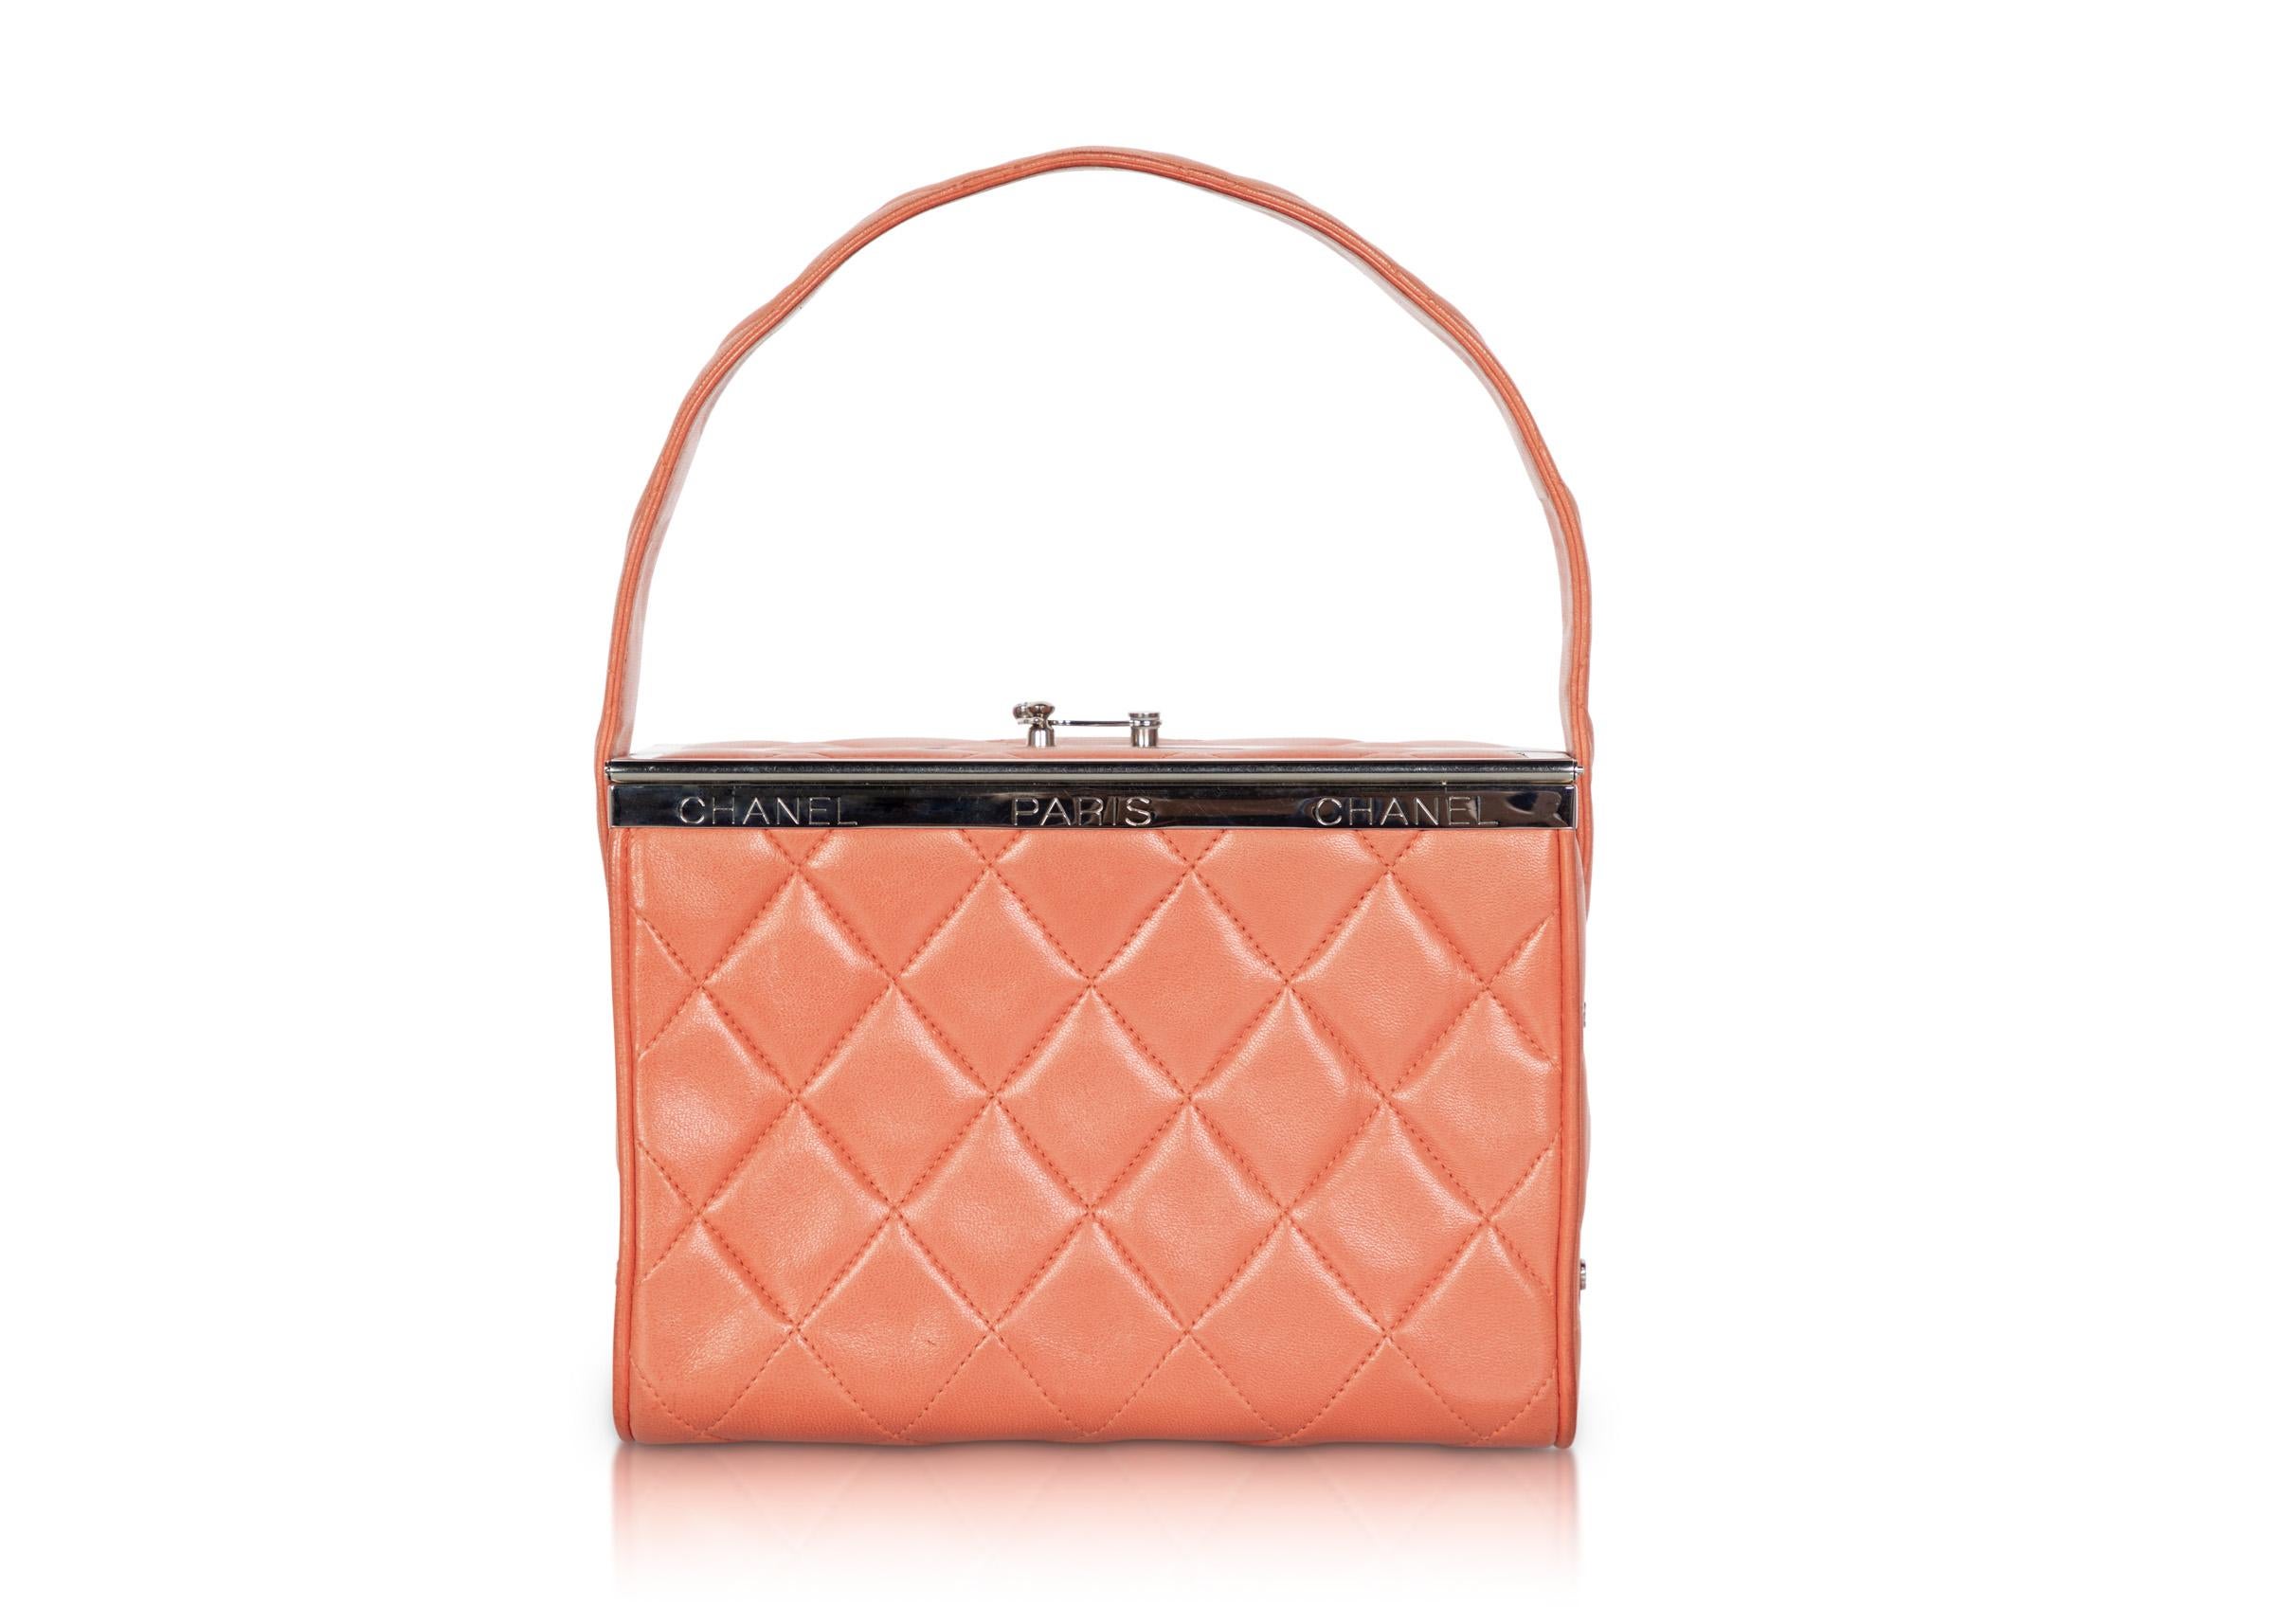 A fabulous and rare vintage Chanel box bag in a melon orange color done  in luxurious lambskin leather.
Features: A single compartment with a side pocket . Double frame top opening with a hook closure accented with a silver 